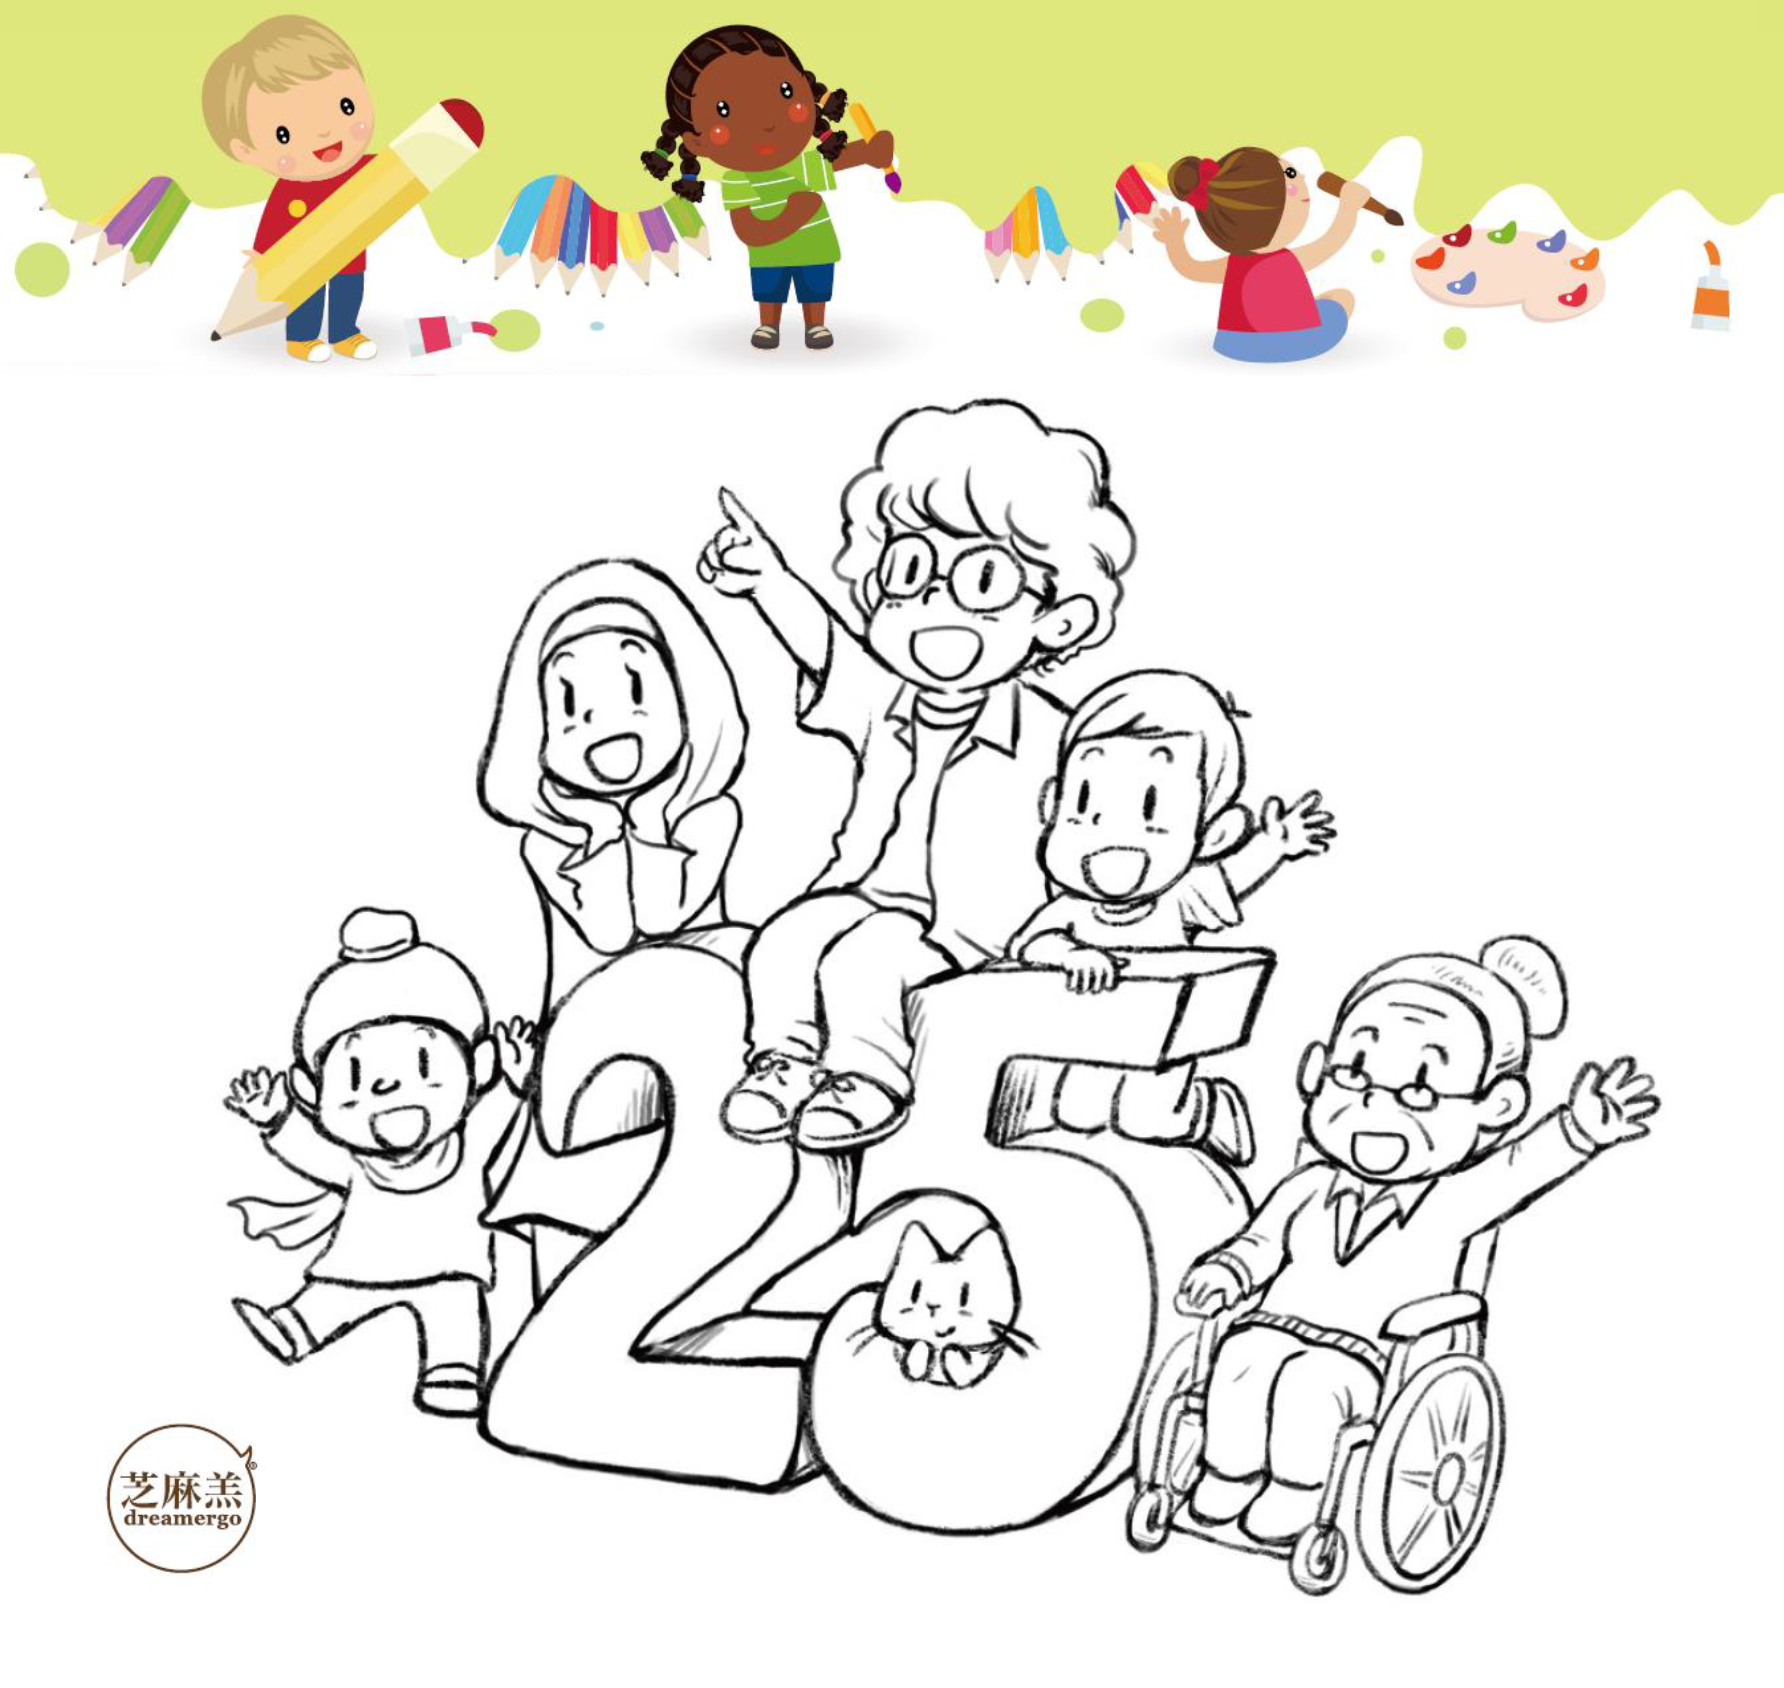 Black and white illustration created by cartoonist dreamergo, featuring, from the right, an eldery woman on a wheelchair, a young boy, a middle-aged woman, a girl wearing a hijab, and a boy wearing a turban.